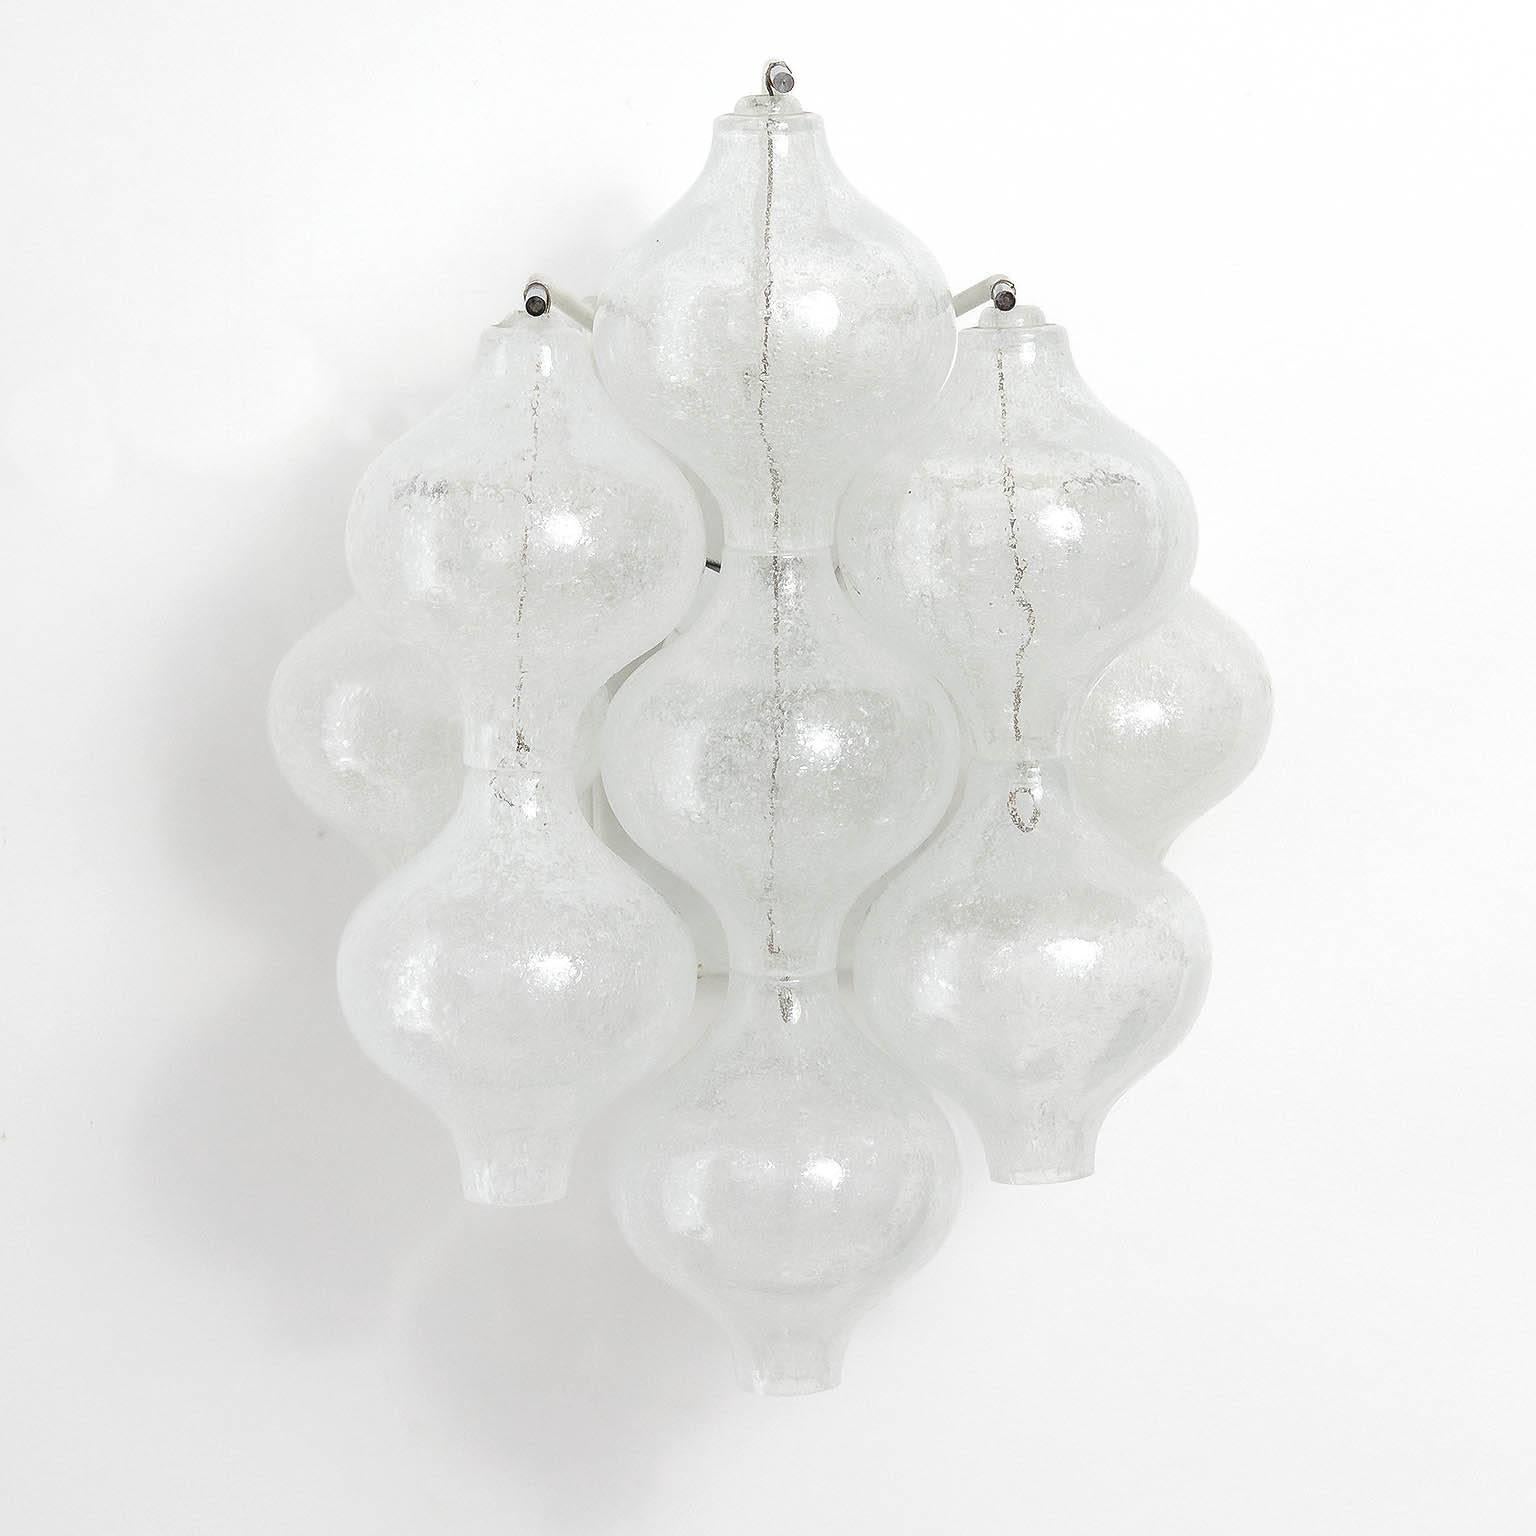 A pair of 'Tulipan' glass wall light fixtures by Kalmar, Austria, Vienna, manufactured in midcentury, circa 1970 (late 1960s or early 1970s).
The name Tulipan derives from the tulip shaped handblown bubble glasses. Each glass is handmade and